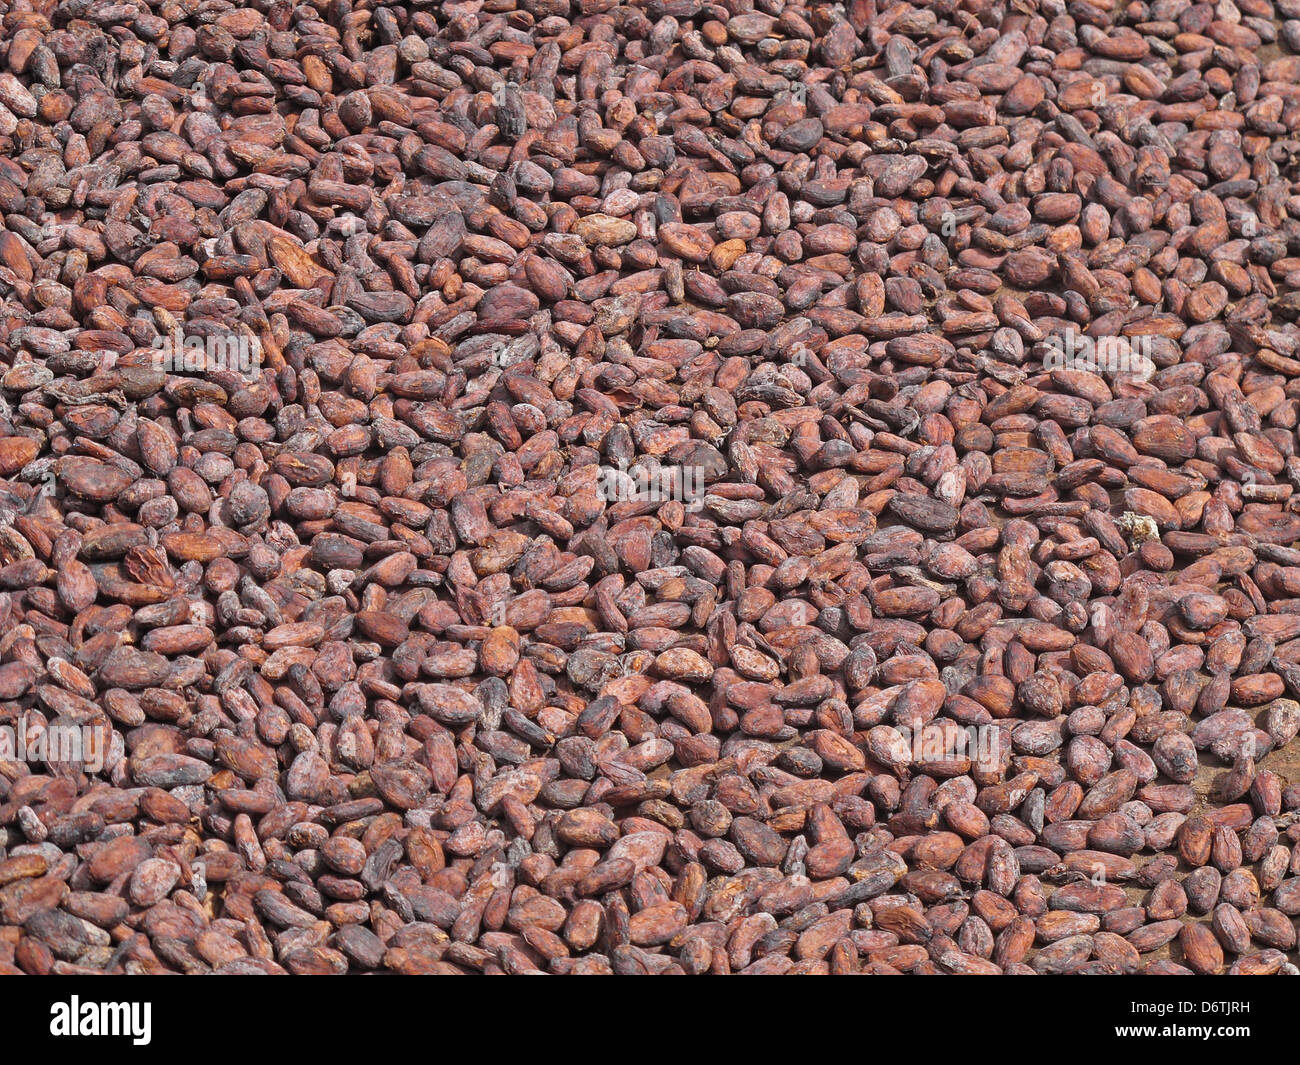 Cocoa Theobroma cacao crop close-up beans in drying tray Fond Doux Plantation St. Lucia Windward Islands Lesser Antilles Stock Photo